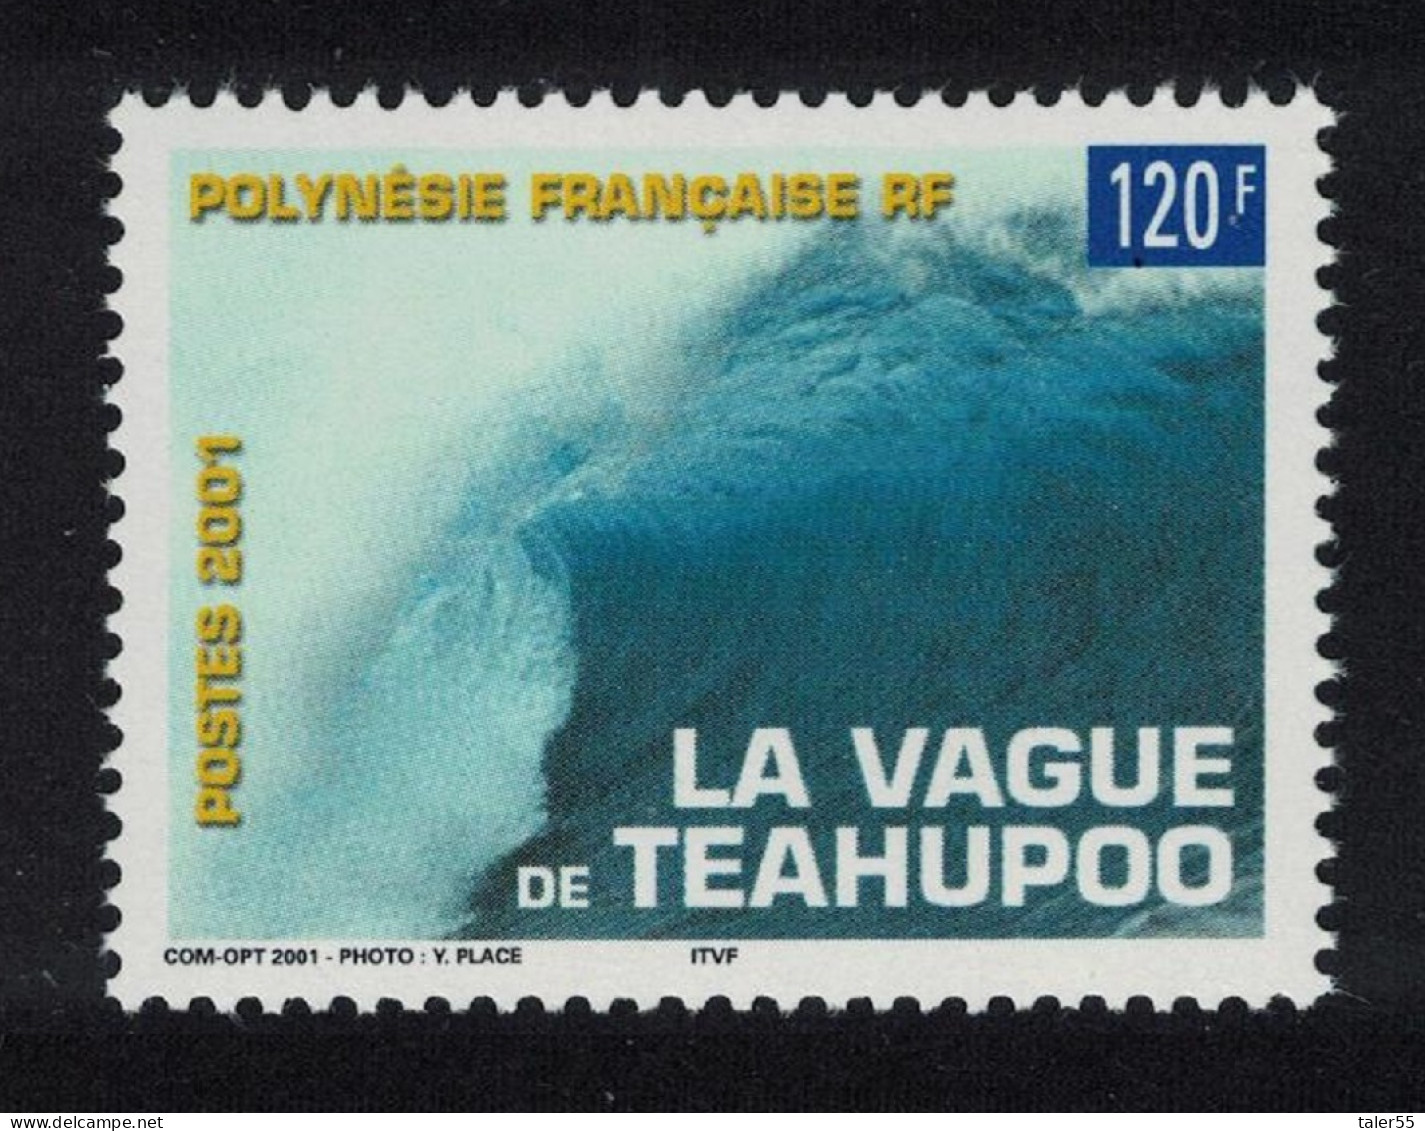 Fr. Polynesia Surfing The Heaviest Wave In The World Teahupoo 2001 MNH SG#907 - Ungebraucht